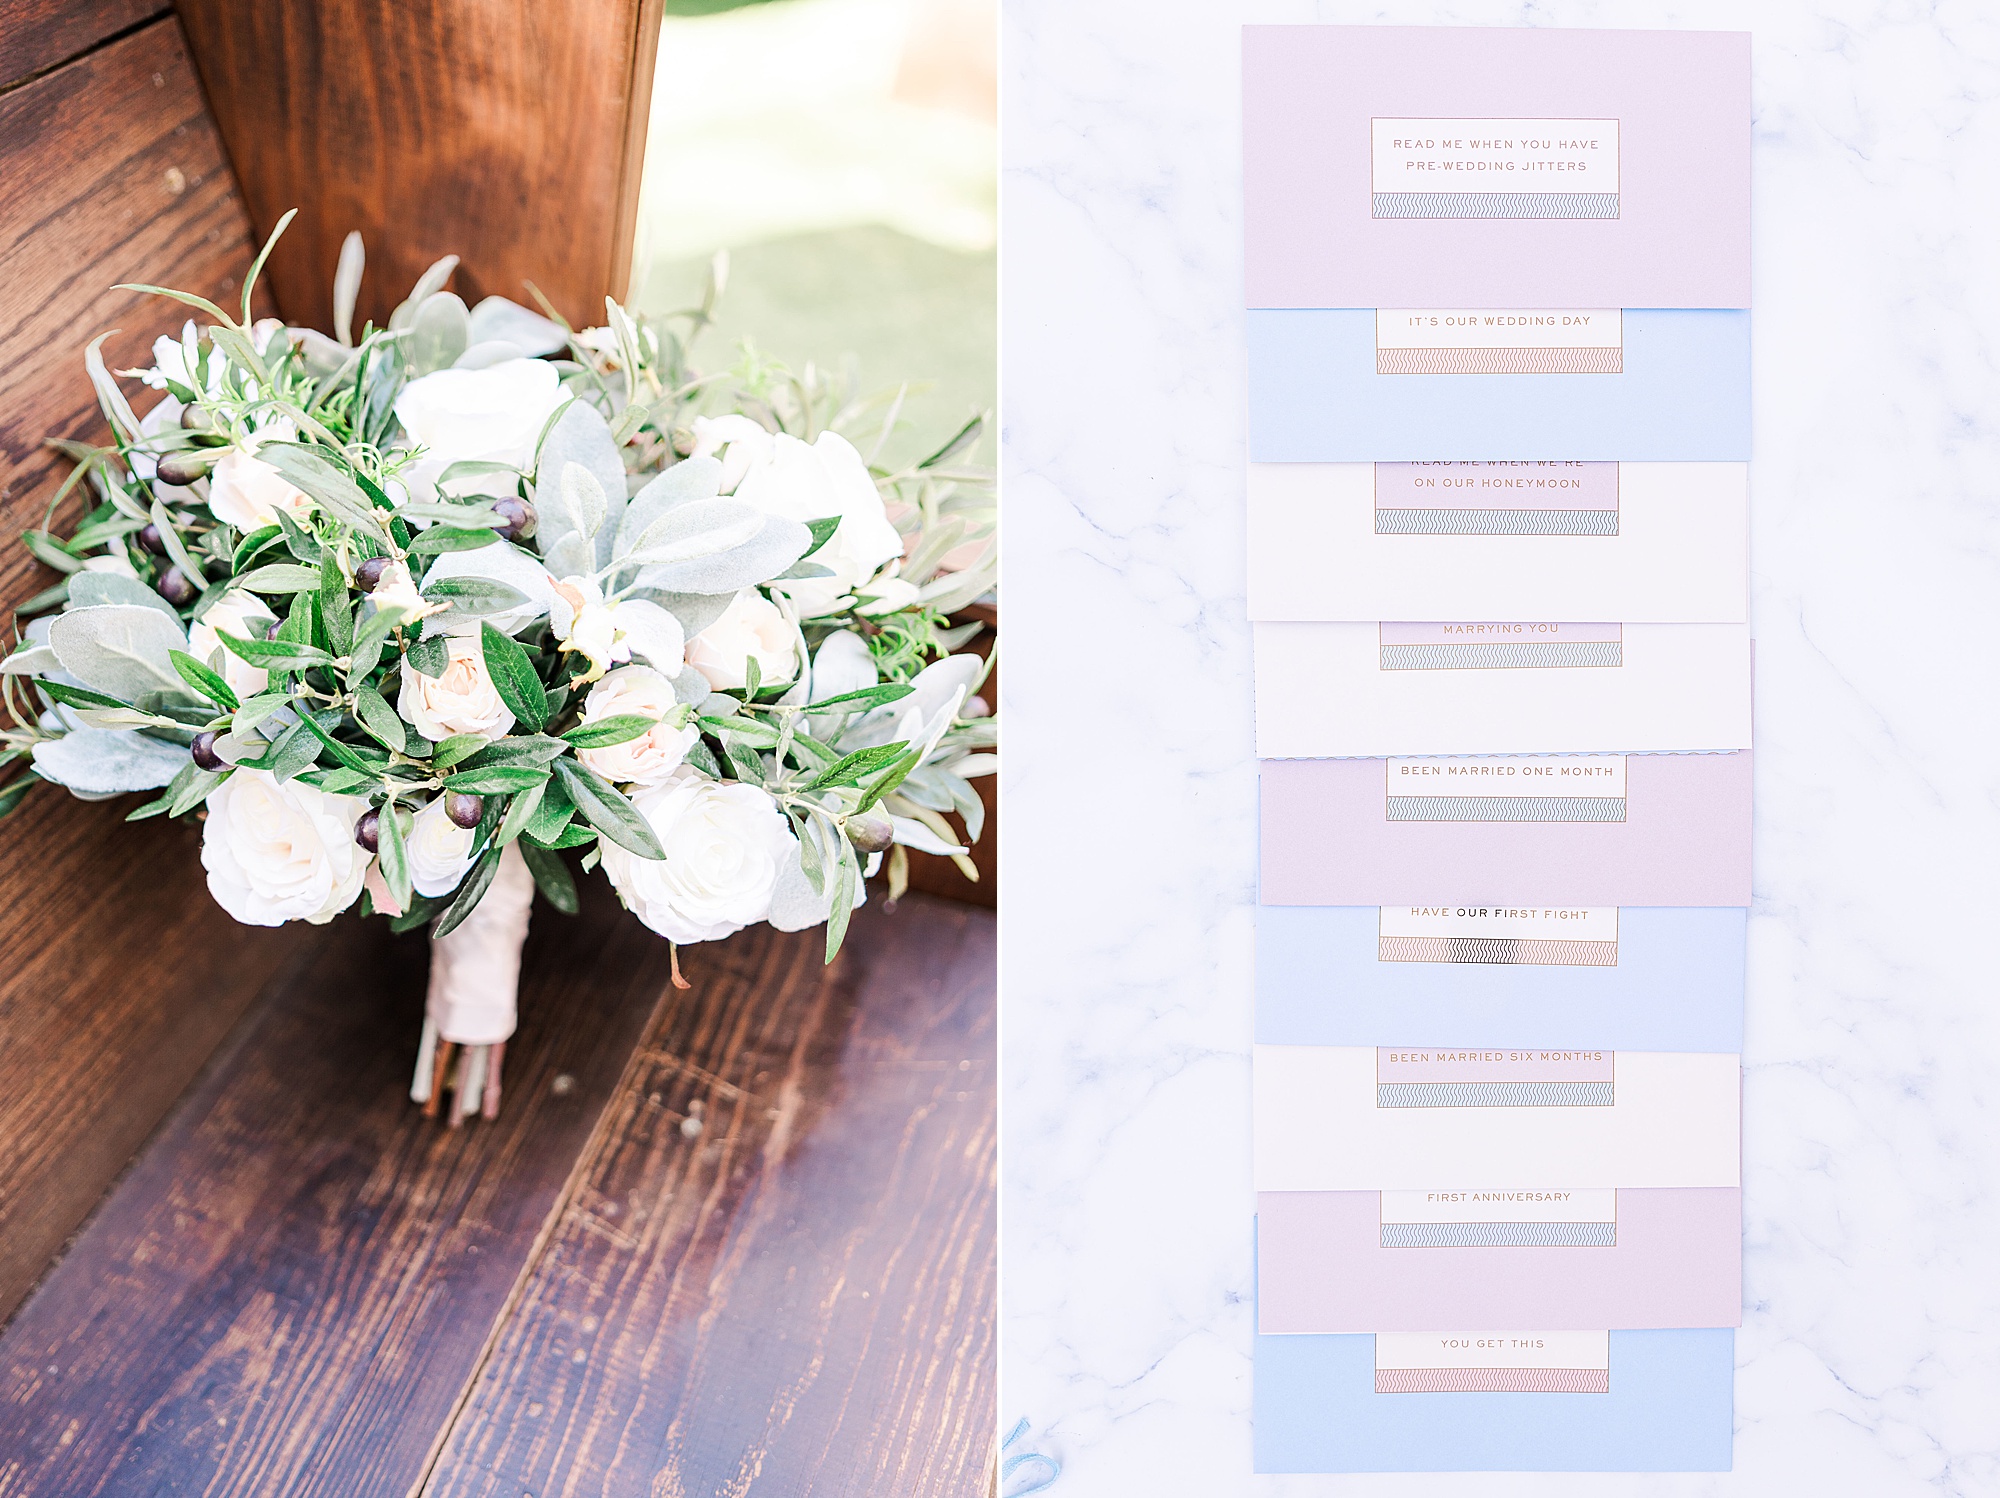 bouquet sits on wooden bench next to invitations